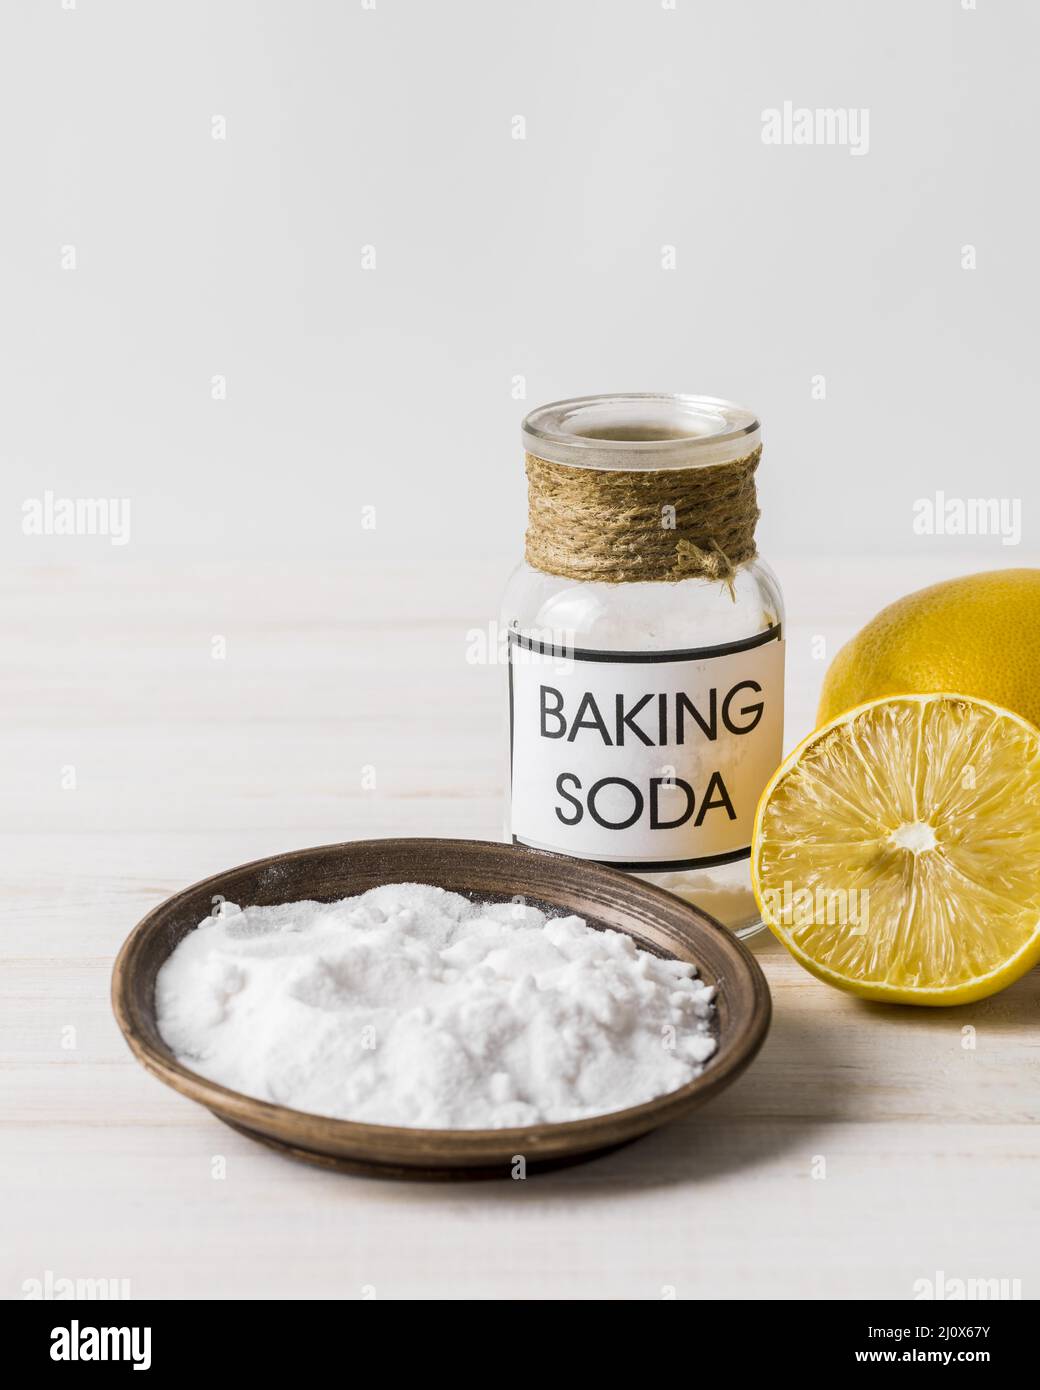 Using baking soda organic cleaning house products. High quality beautiful photo concept Stock Photo